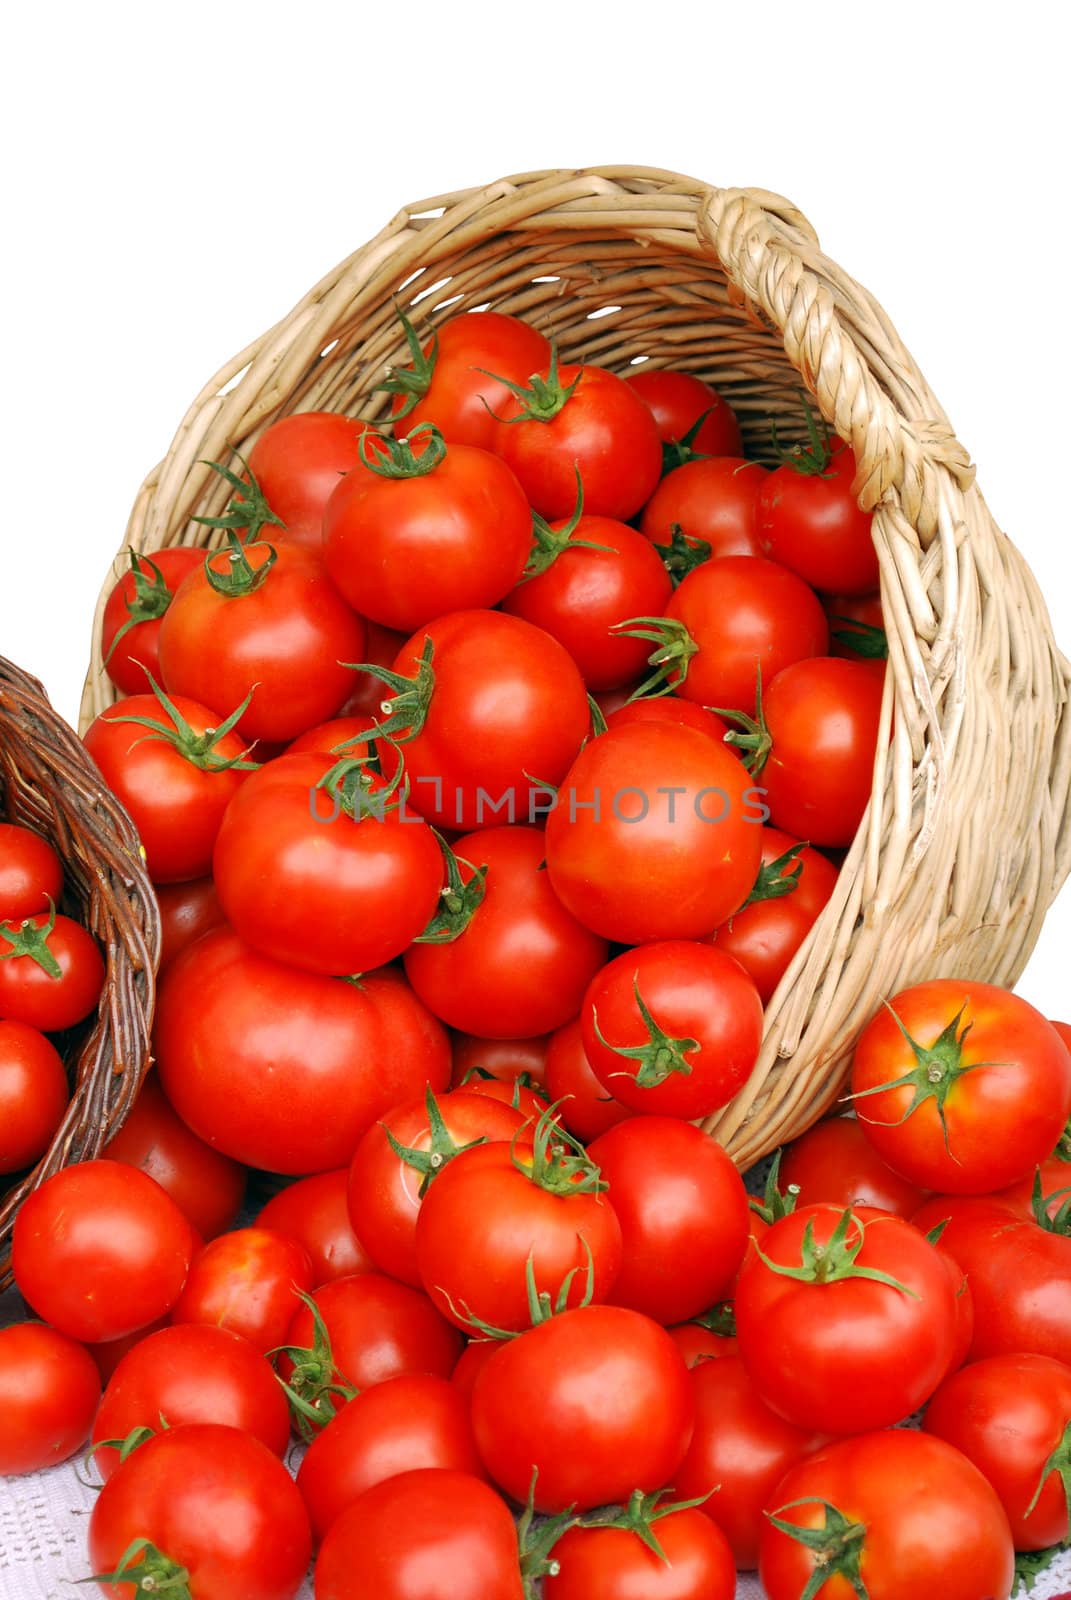 Basket with tomatoes on white